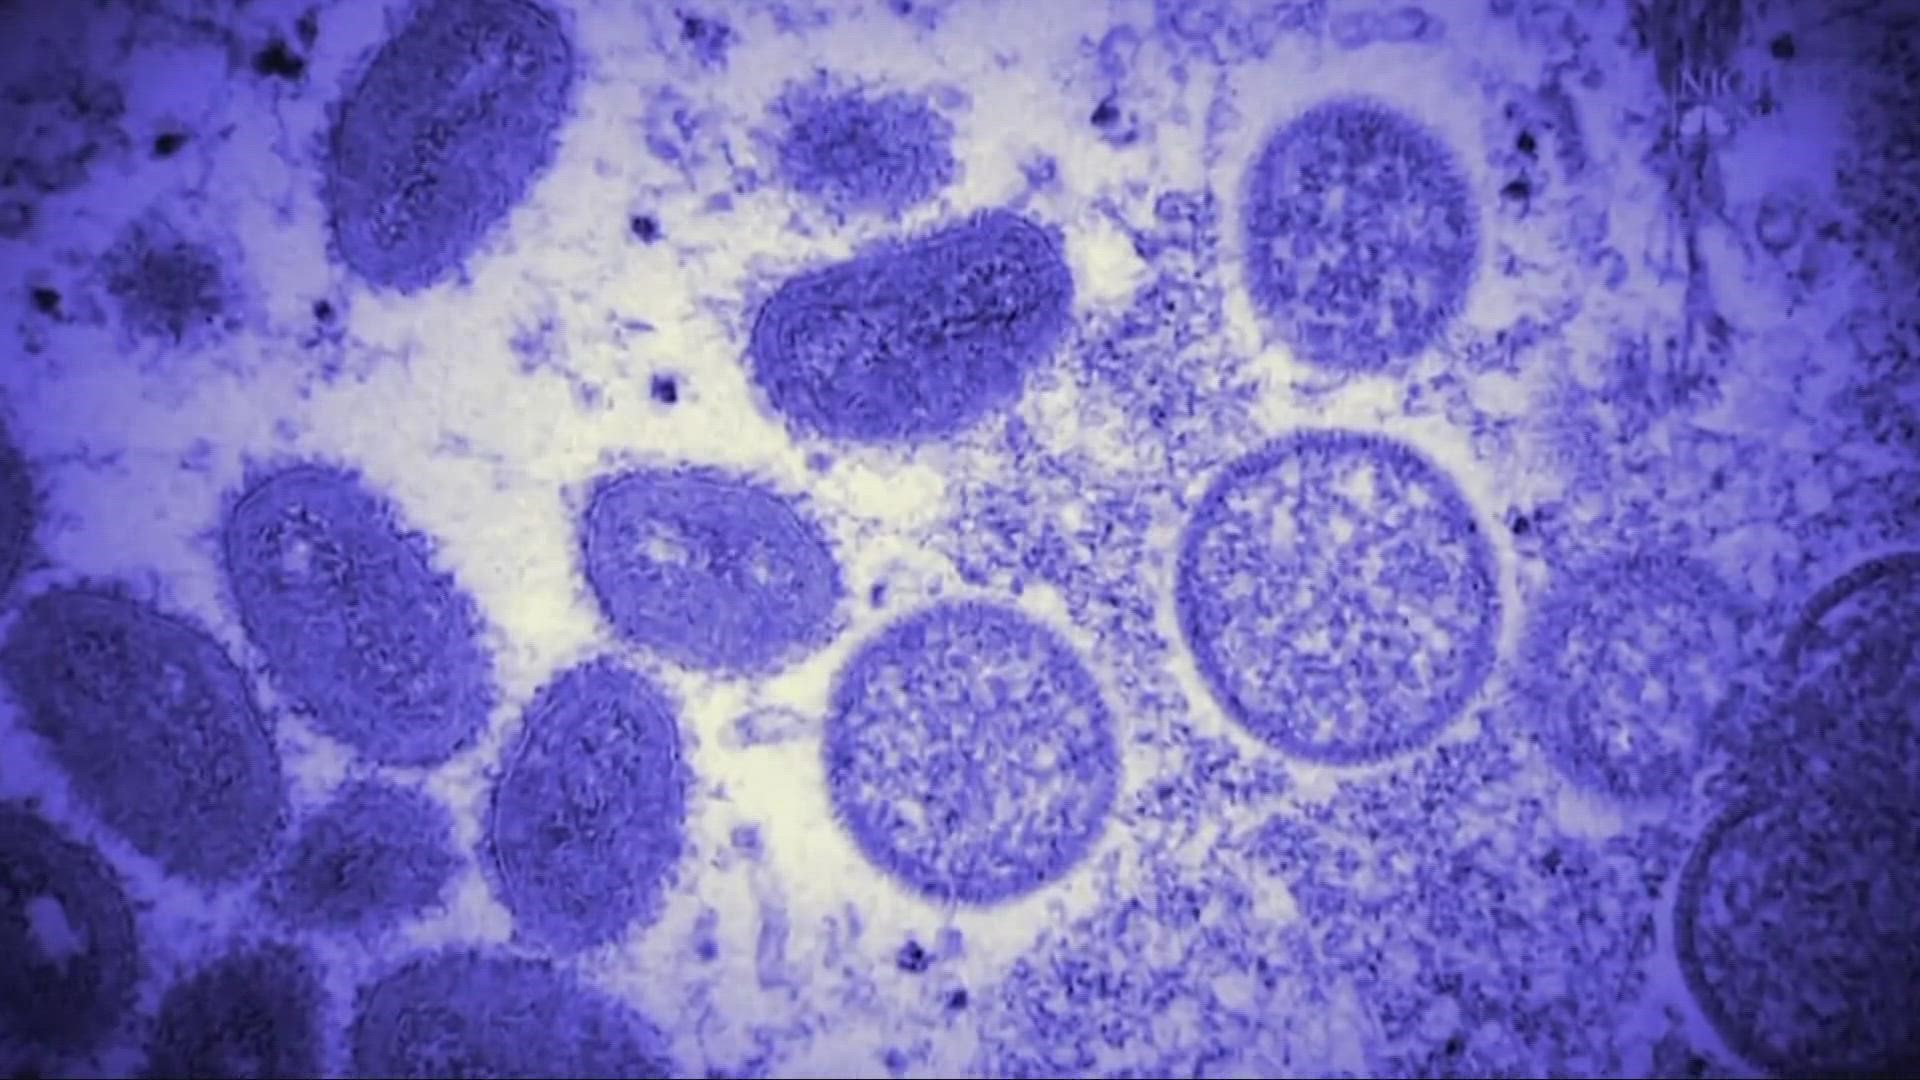 There are now 18 cases of monkeypox in Cleveland, and two cases in Lorain County.